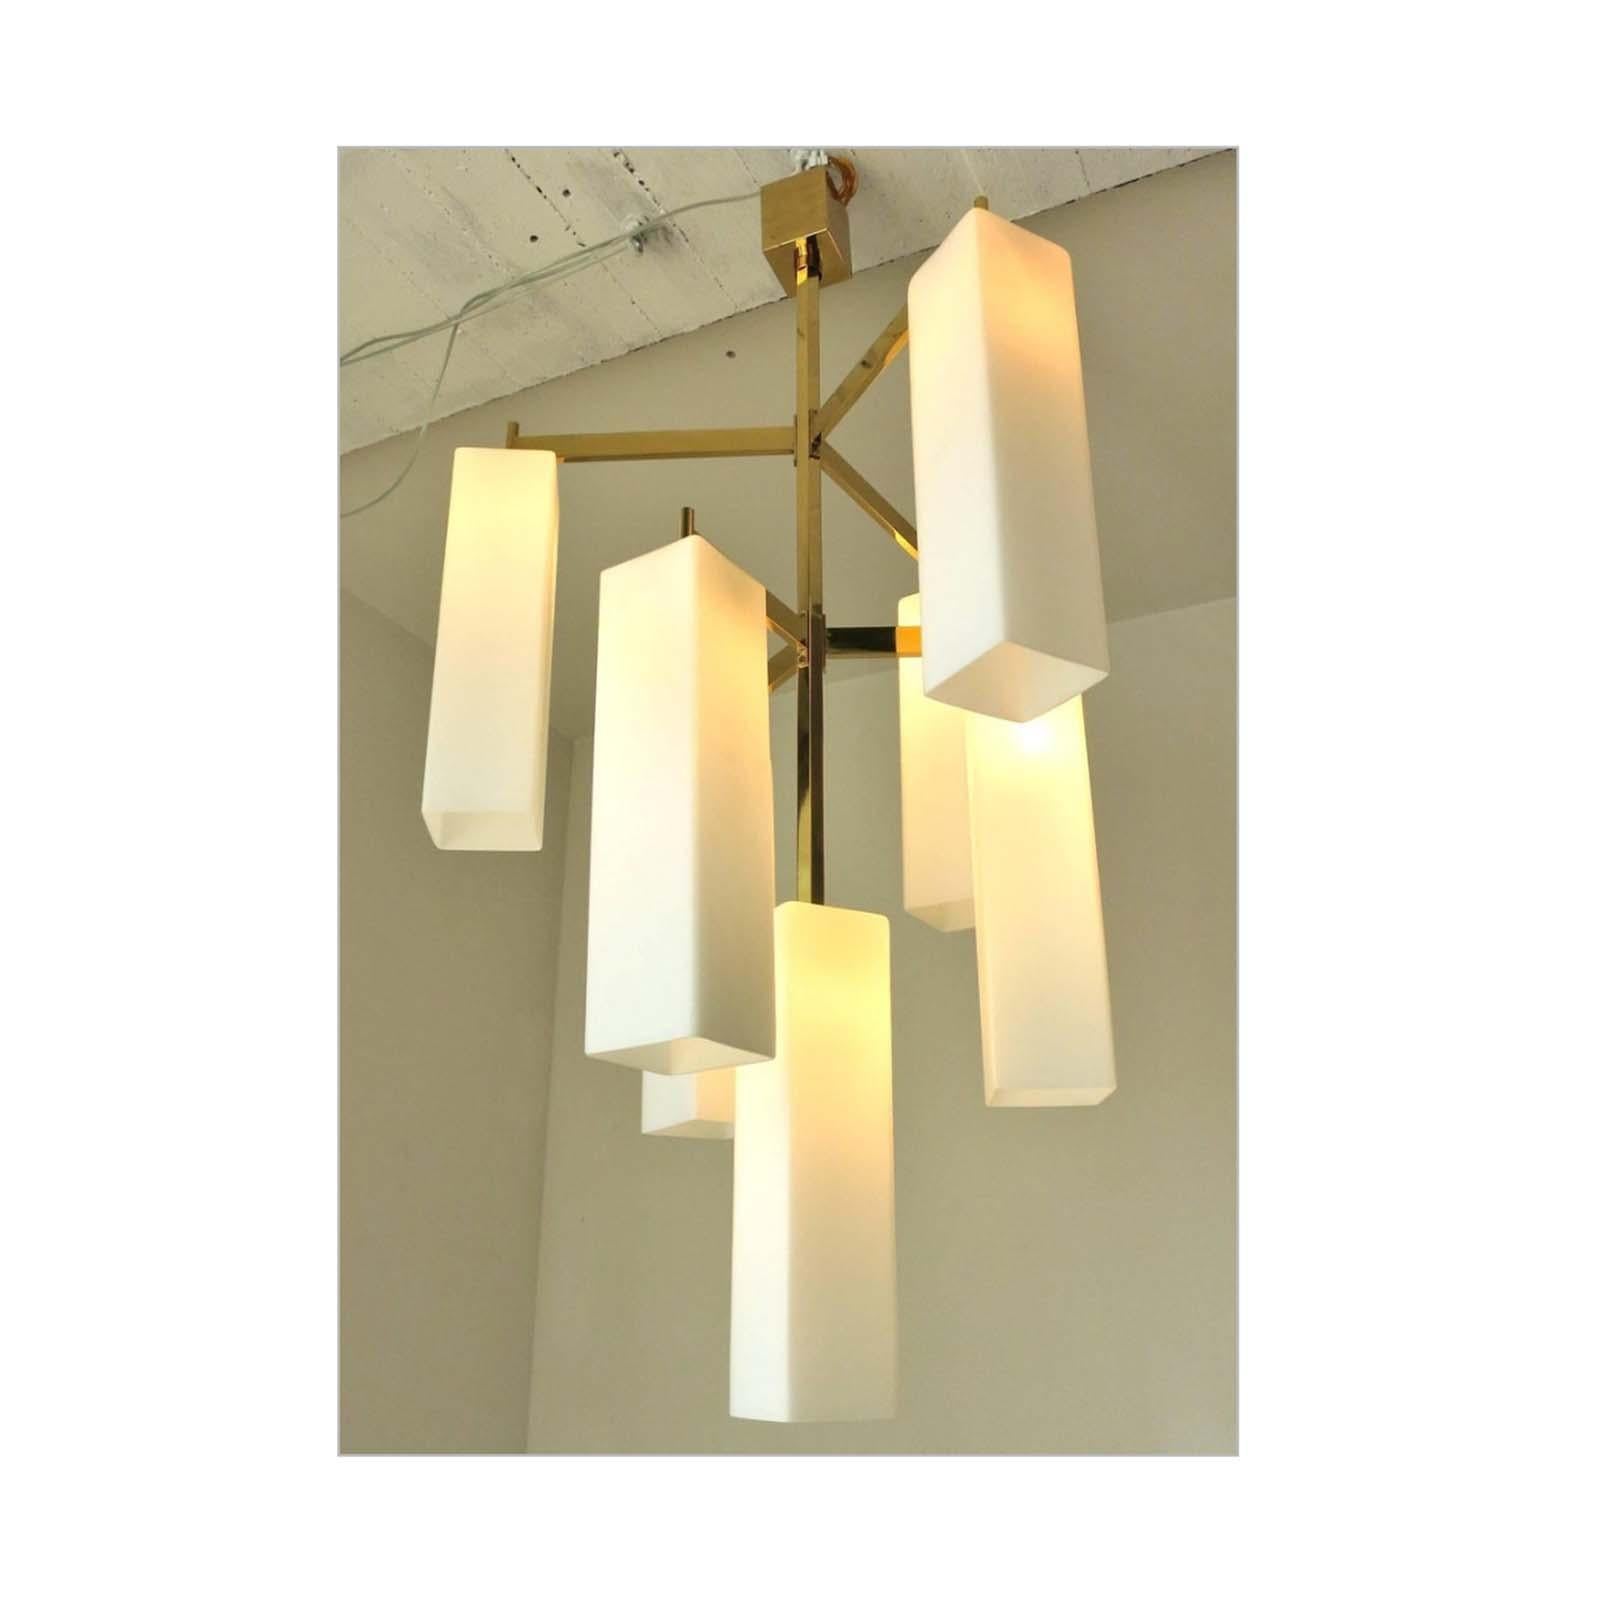 Italian modern chandelier with frosted white rectangular Murano glass shades, mounted on polished brass frame / Made in Italy 2017.